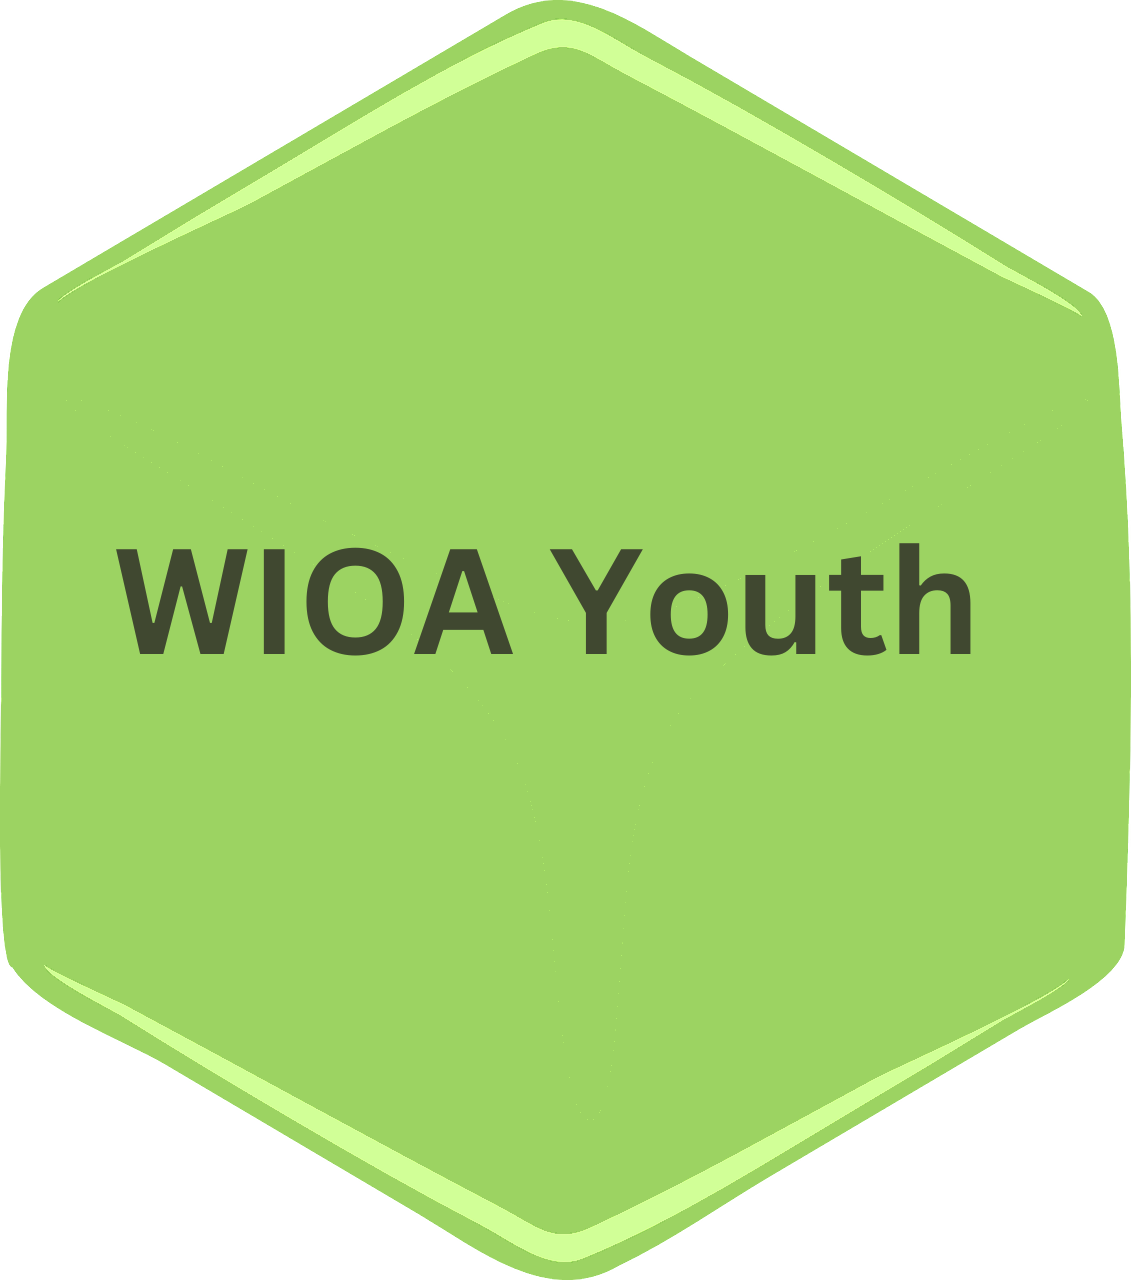 wioa%20youth%20button.png